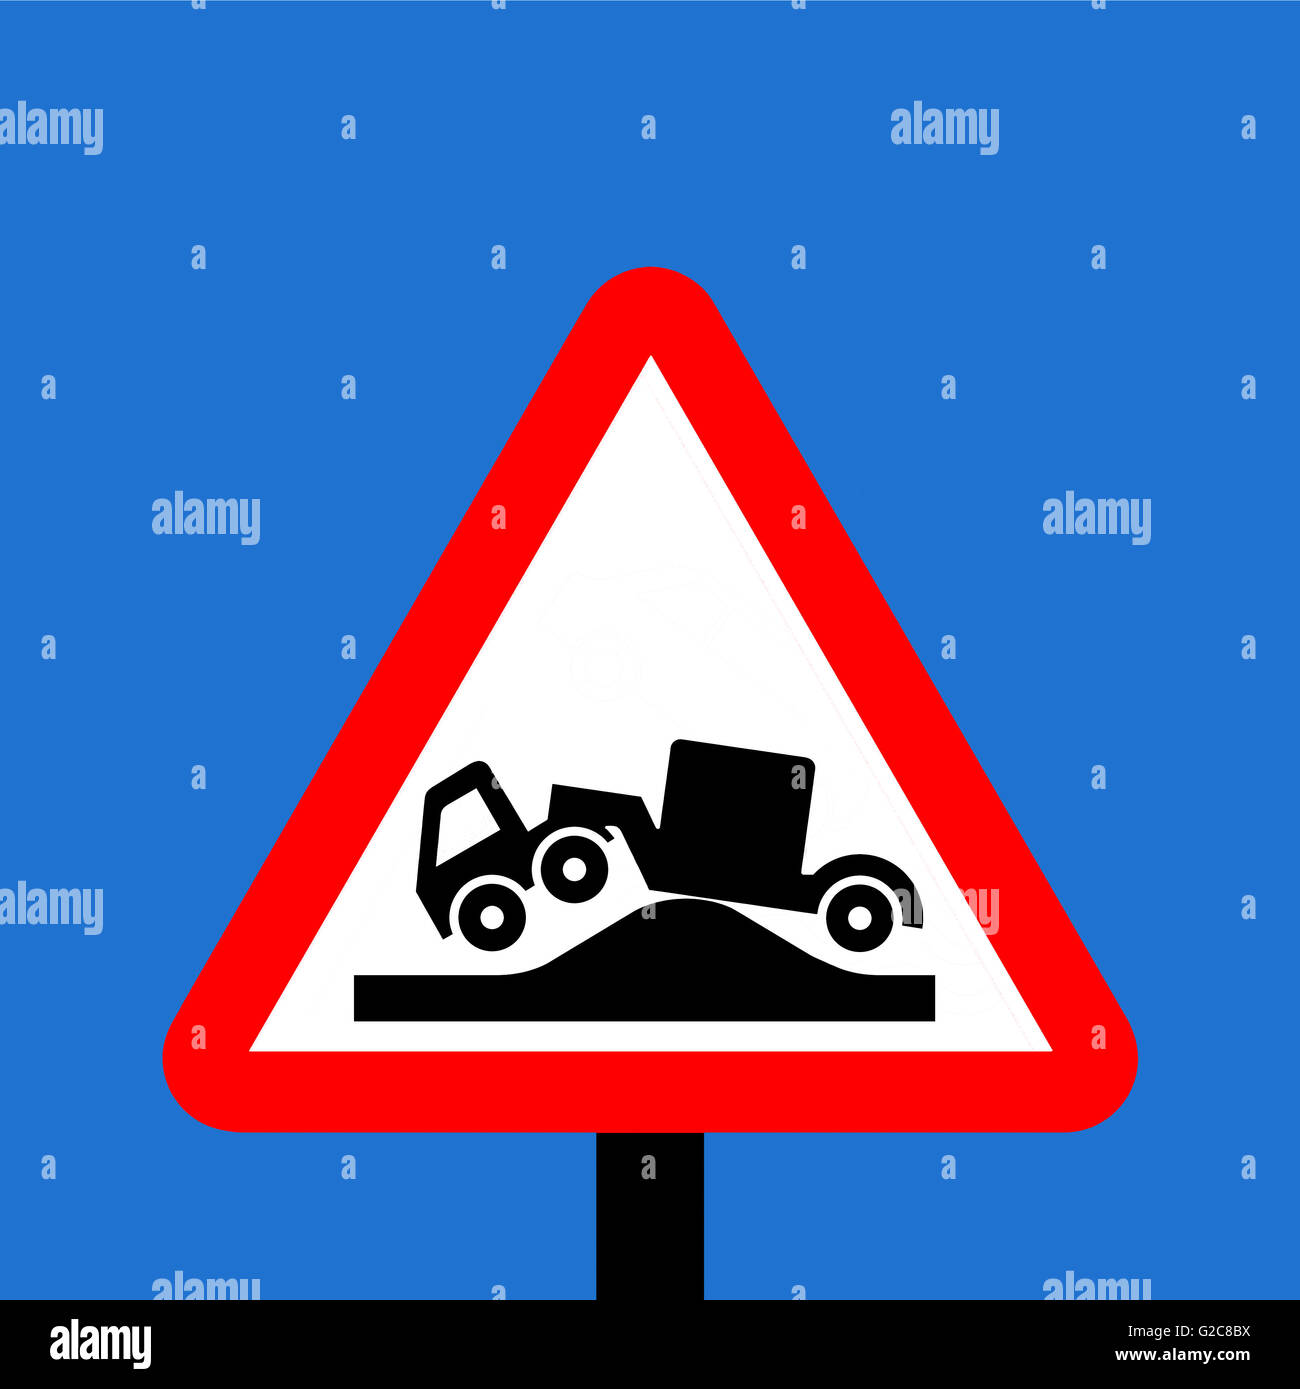 Warning triangle Risk of grounding traffic sign Stock Photo